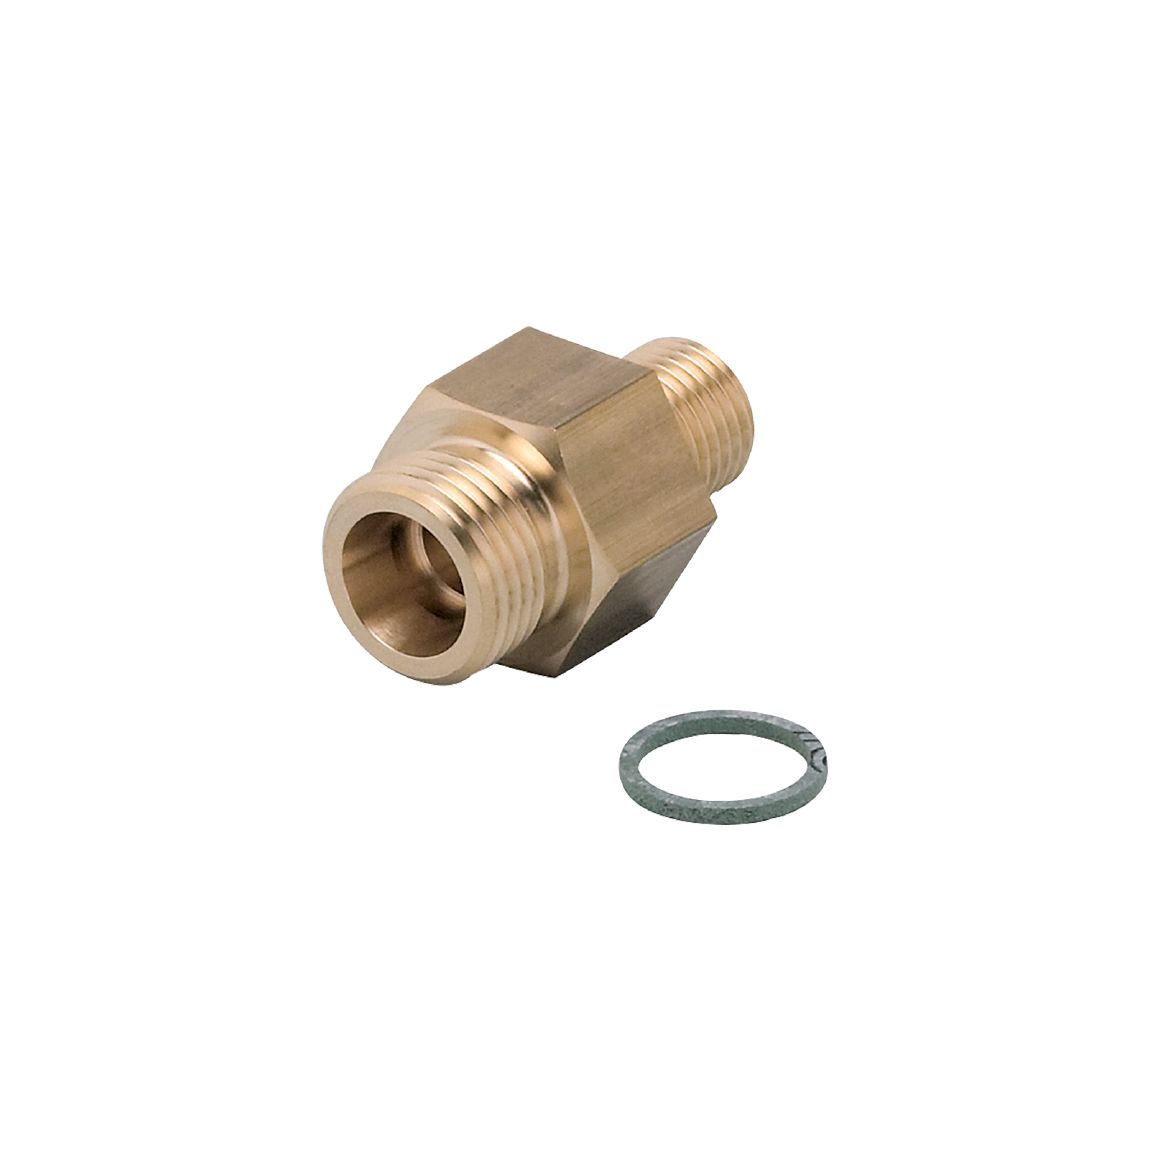 E40098 - Screw-in adapter for process sensors - ifm